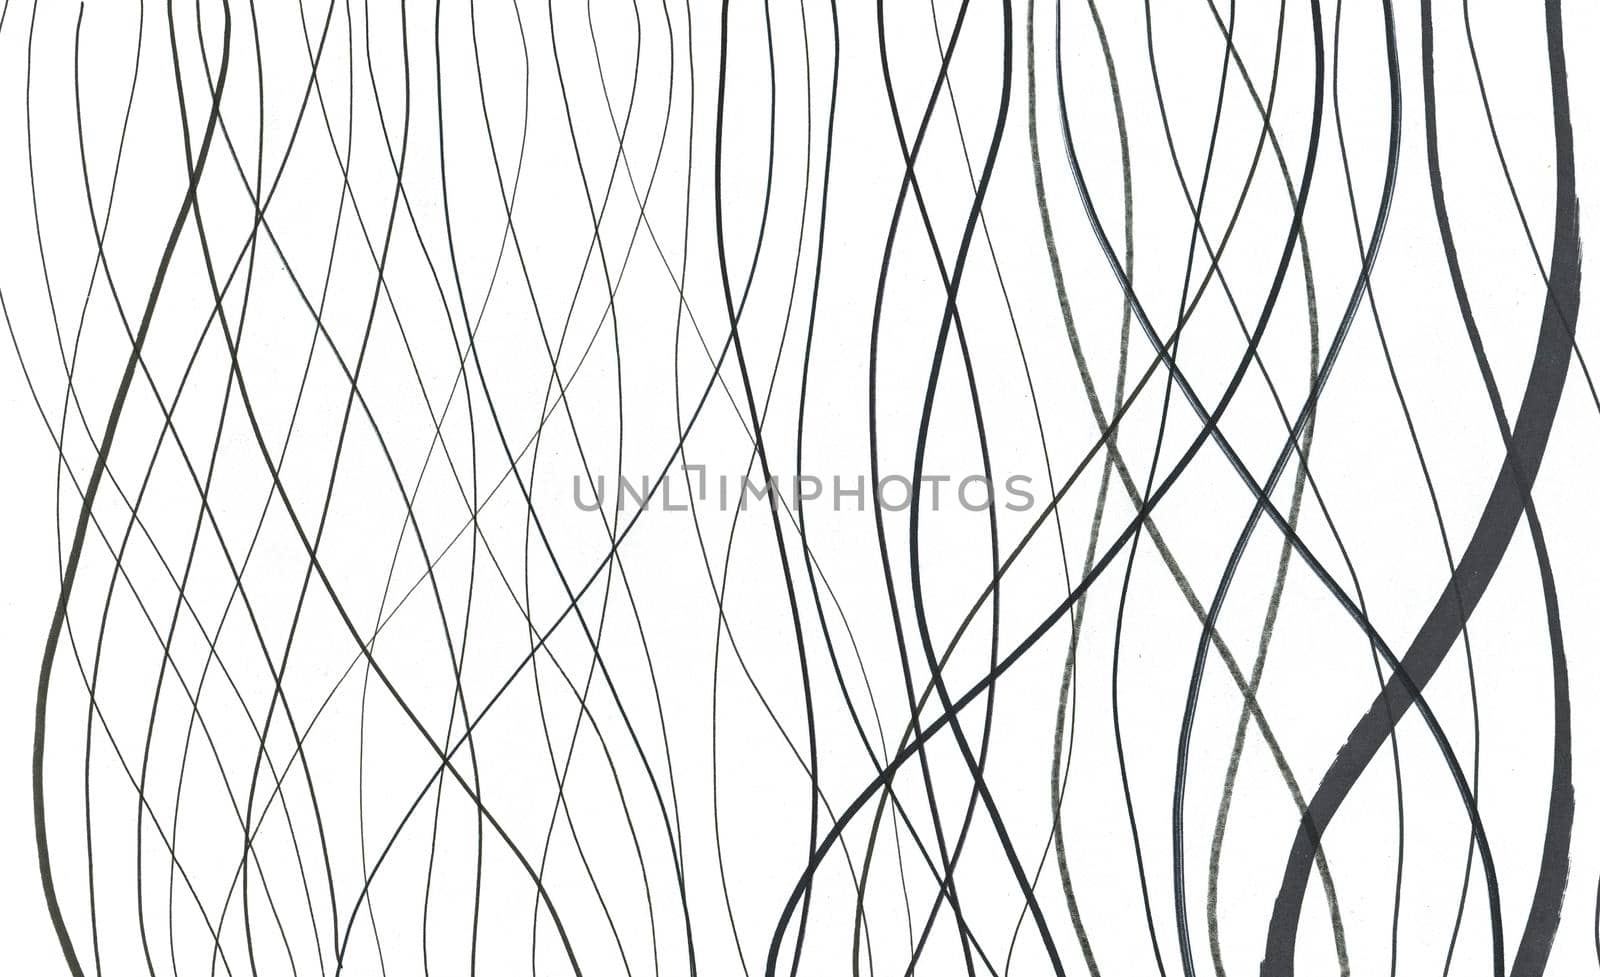 Abstract Marker Hand Drawn Background Texture. Background Illustration Wavy Lines in Doodle Style Hand Drawn Sketch Art. Black Waves on White background.